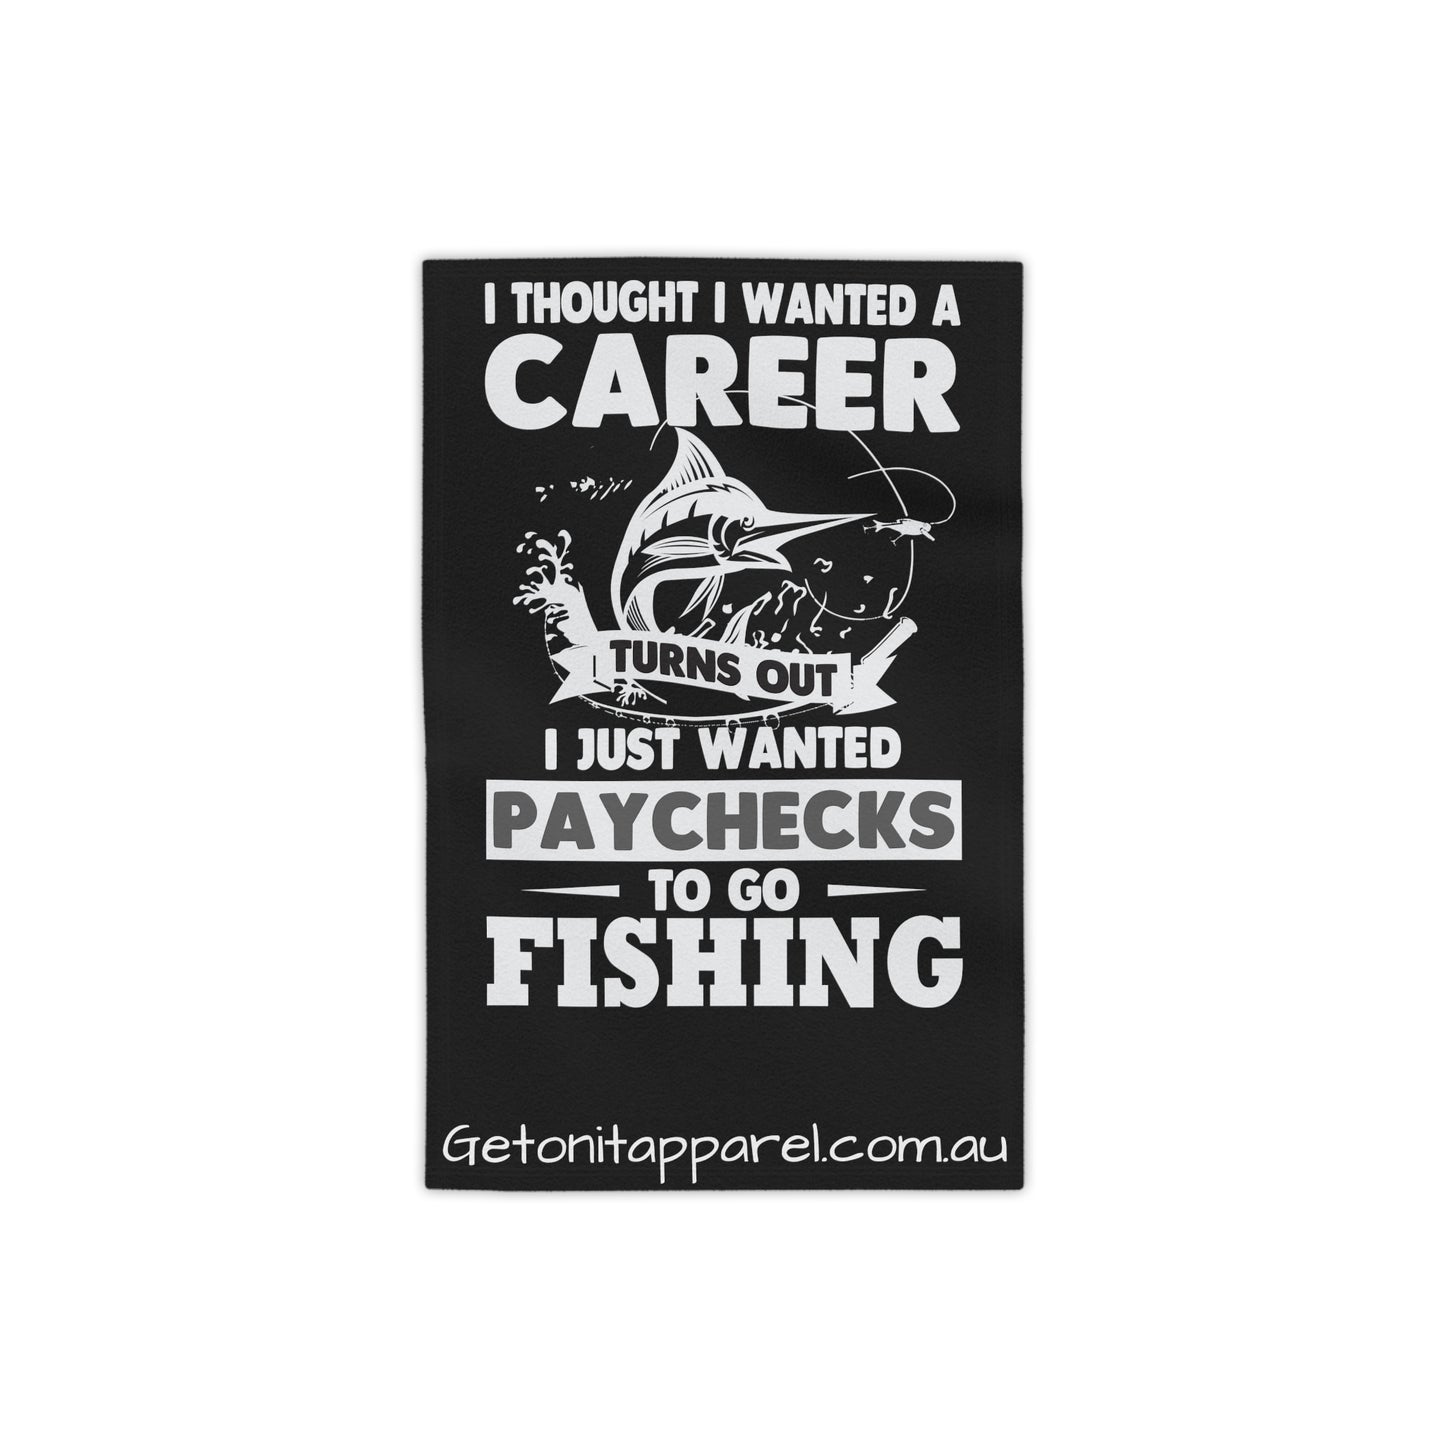 Beach Towels - I Thought I Wanted A Career Turns Out I Want Paychecks To Go Fishing